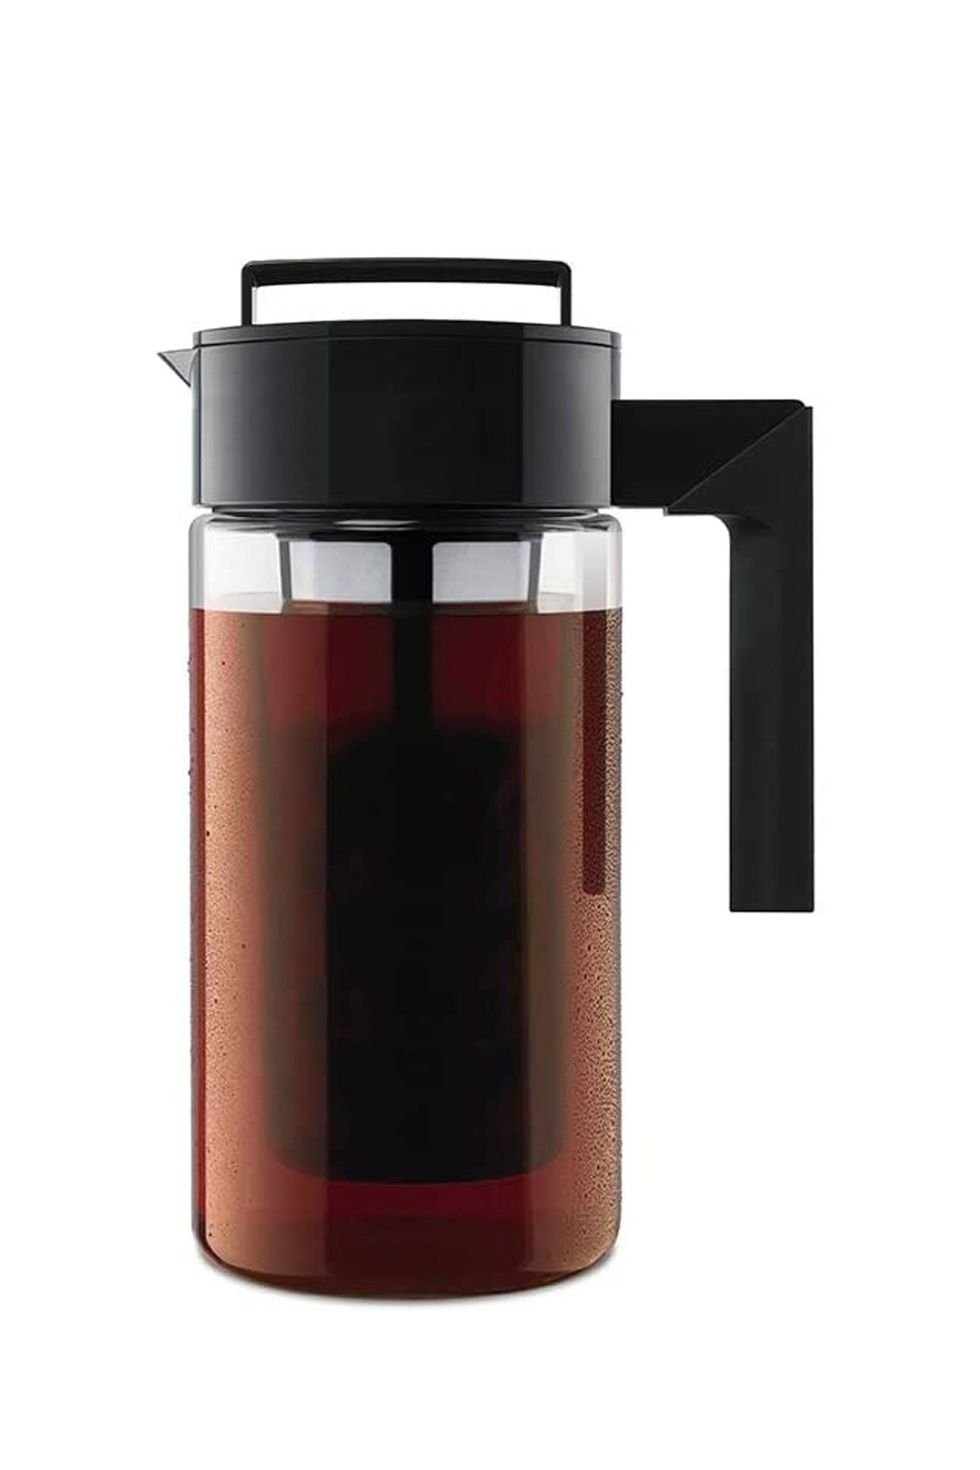 Bean Envy Cold Brew Coffee Maker - 32 oz Glass Iced Tea & Coffee Cold Brew  Maker and Pitcher w/ Silicone Cap & Base